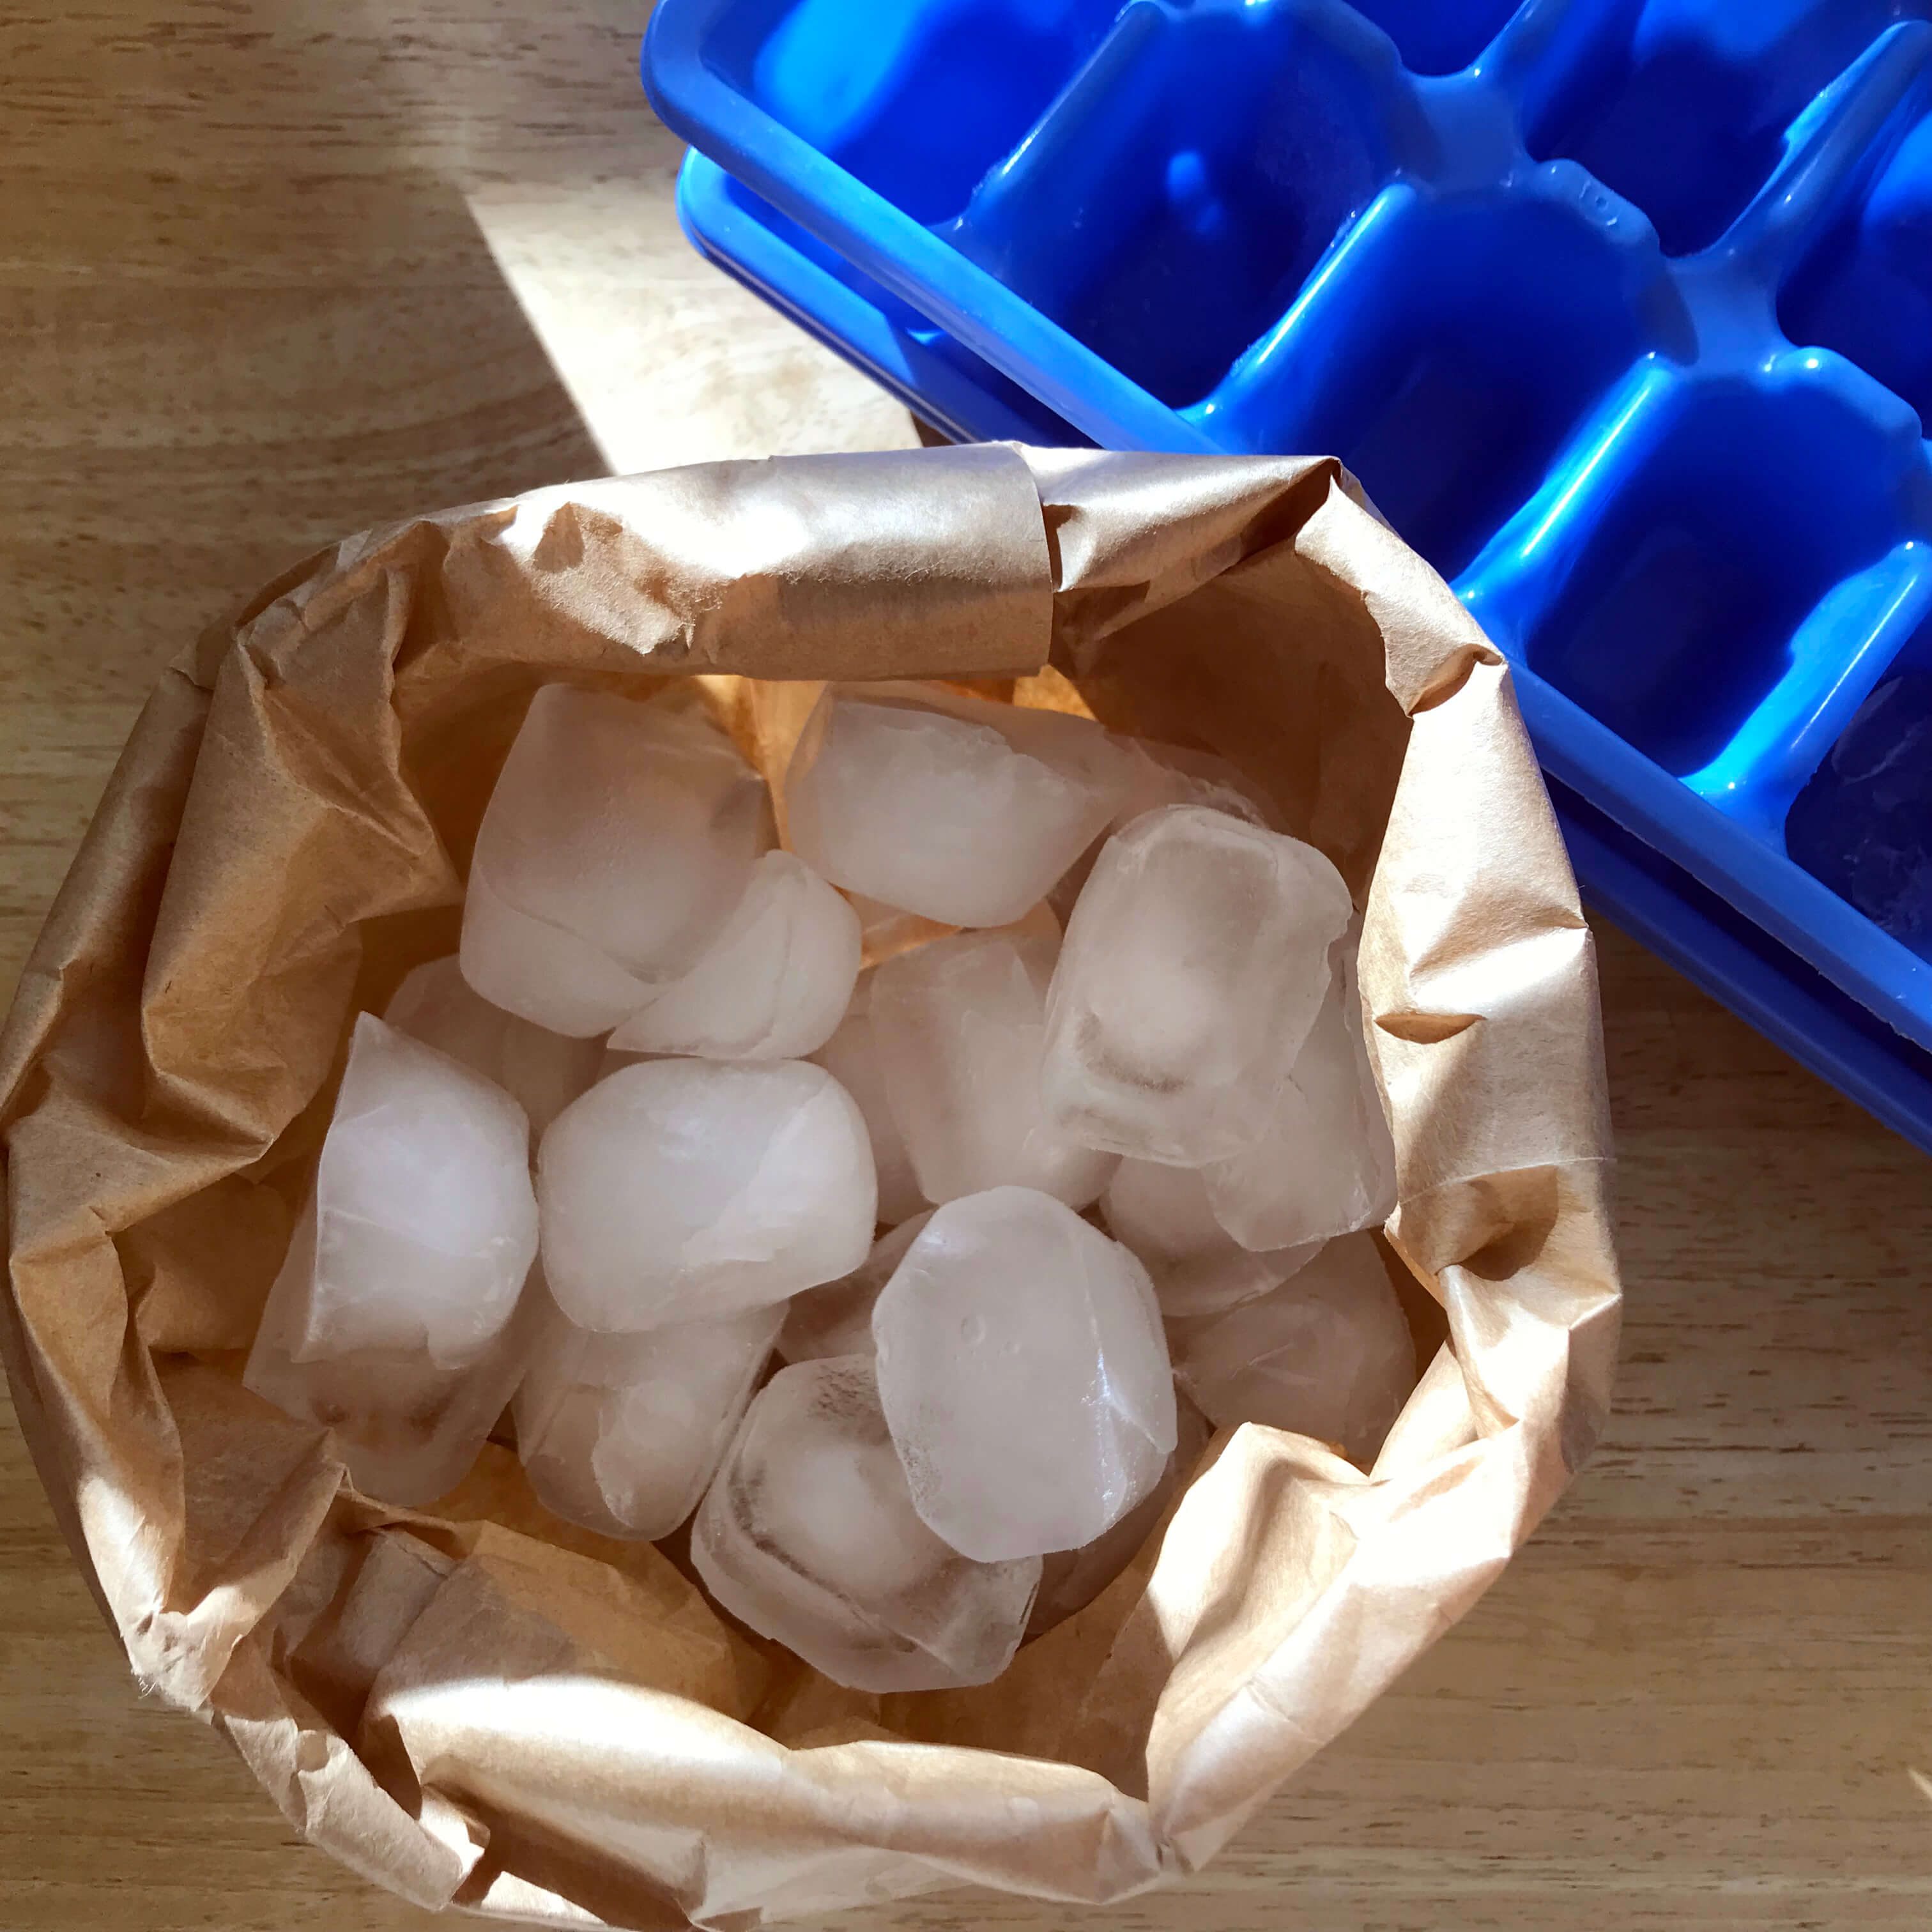 11 Things To Freeze In Ice Cube Trays - Misfits Market